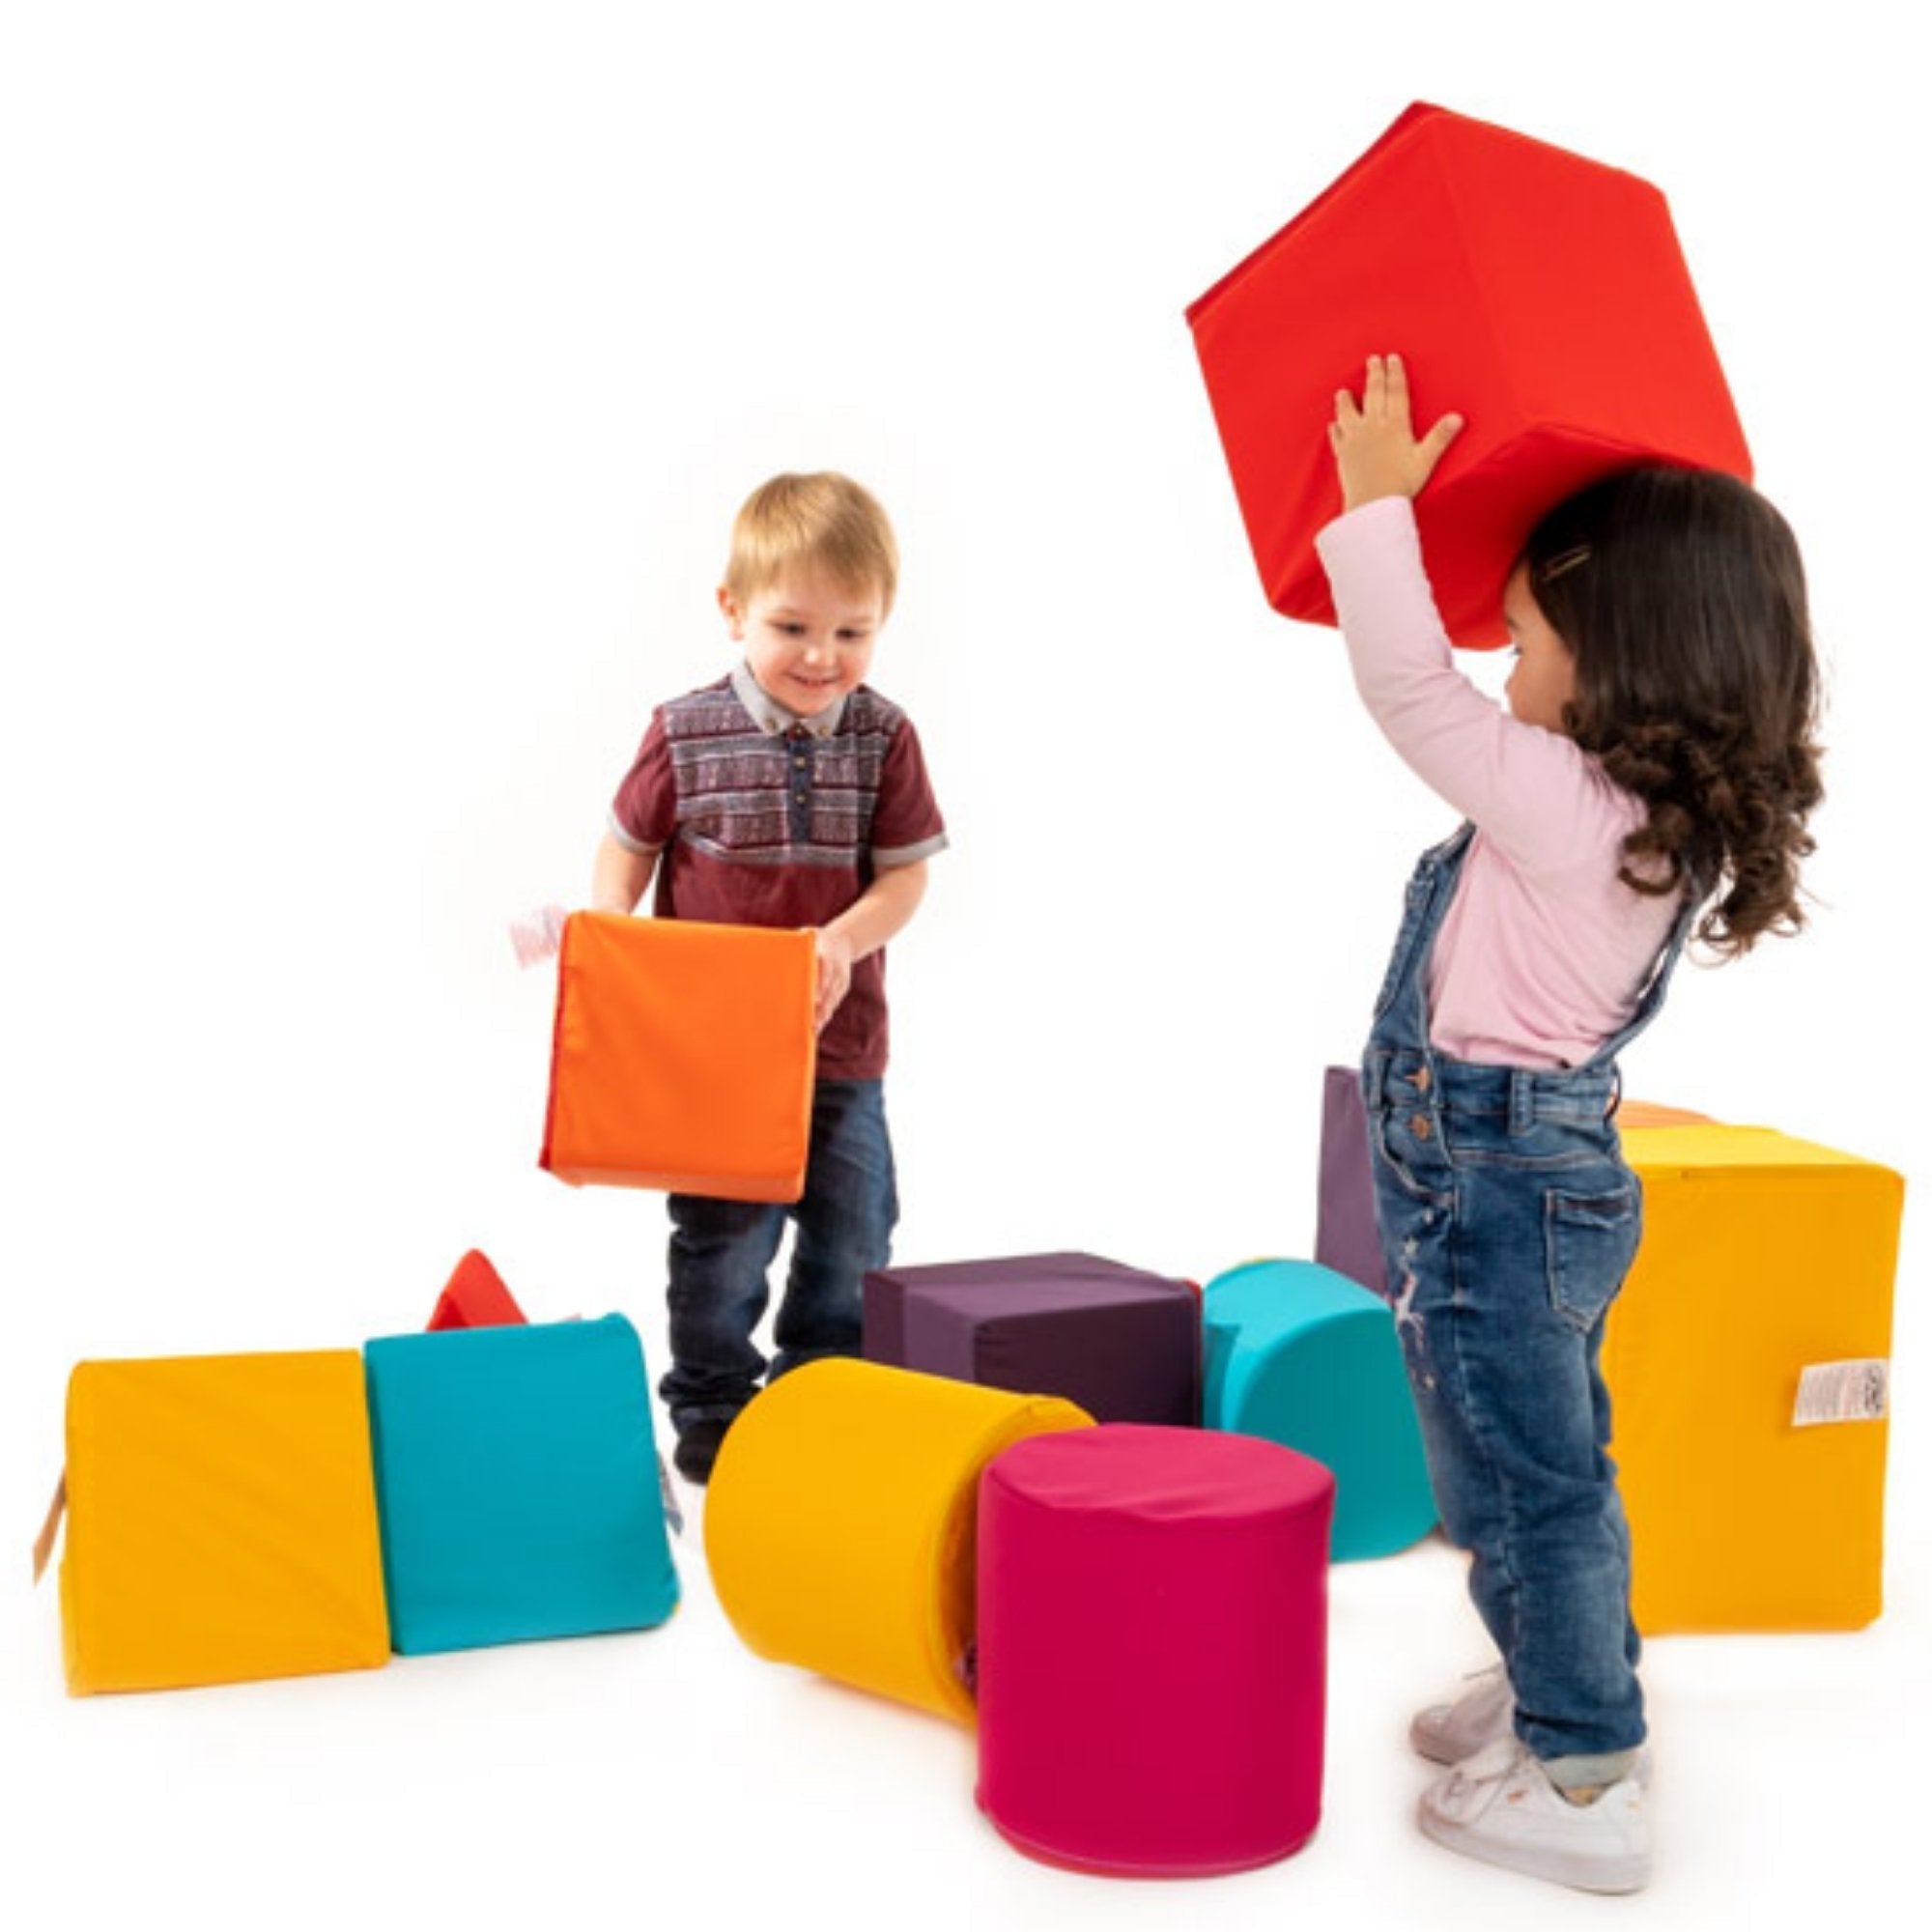 Construction Mini Soft Play Set, This Construction Mini Soft Play Set is a must for any nursery. The Construction Mini Soft Play Set contains square, rectangular, wedge and cylinder shaped blocks in different sizes and colours. As children learn to play with them they develop both basic physical skills and important conceptual skills. The shapes look great and provide limitless fun while stimulating imagination. This Construction Mini Soft Play Set is designed with smaller pieces for younger smaller childre